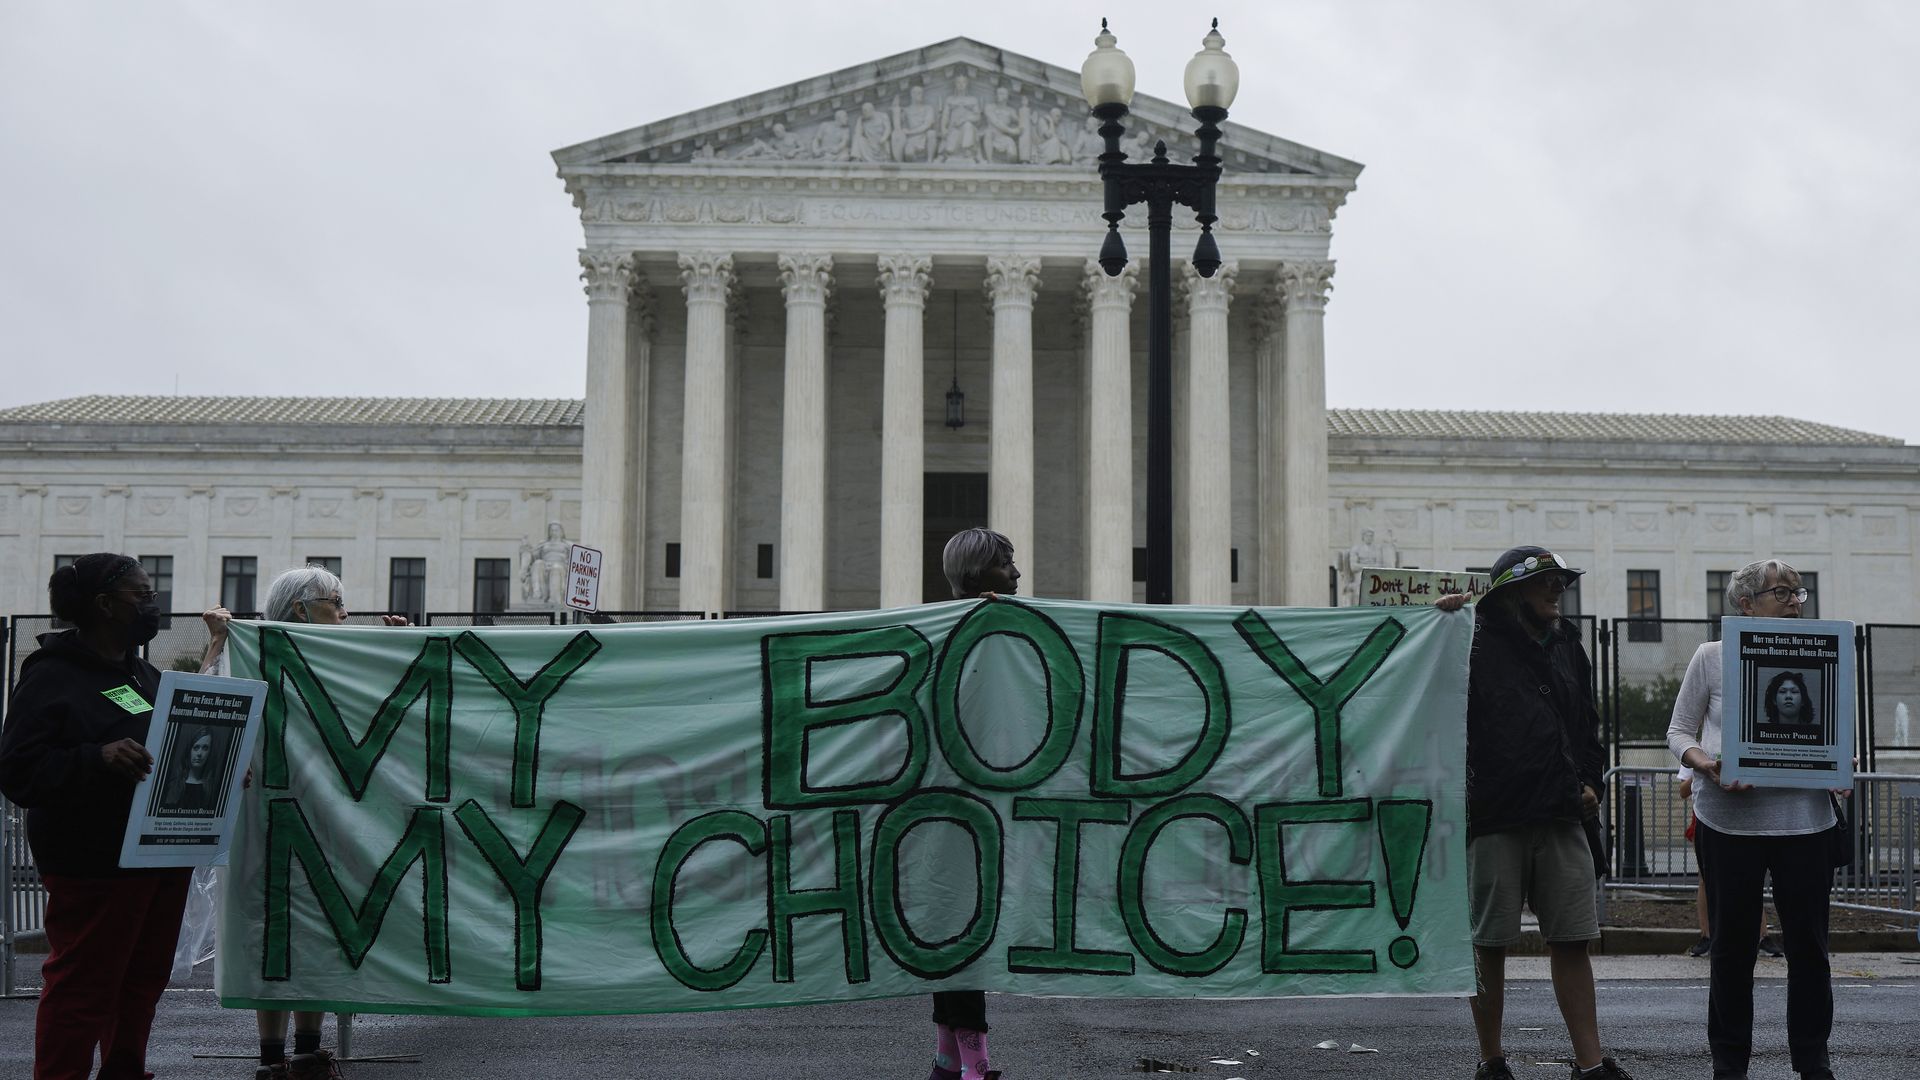 Picture of the Supreme Court building with a sign that says "my body, my choice" in front of it